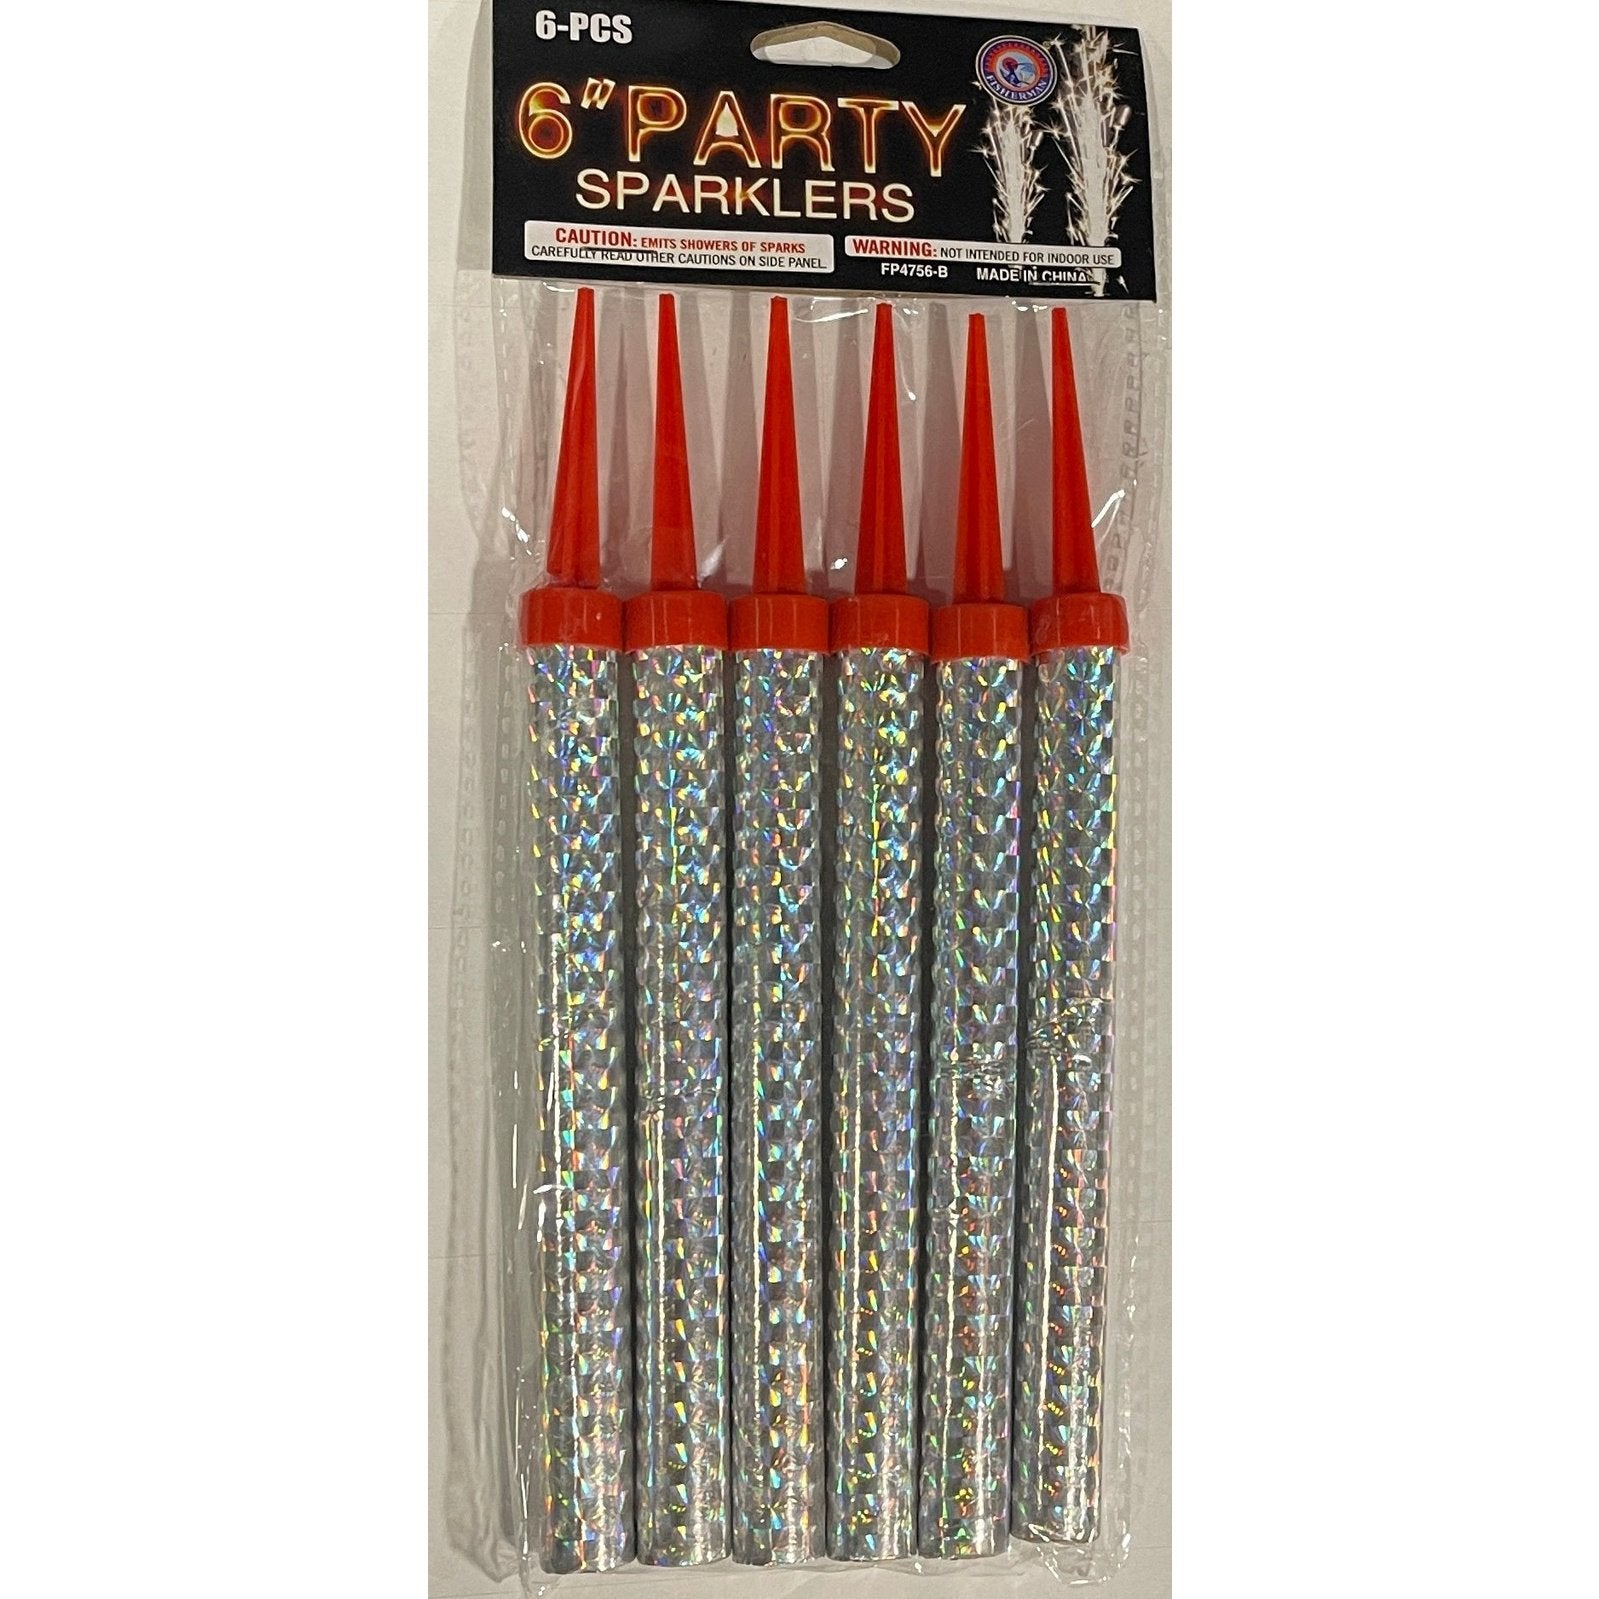 6 Pack Nightclub Bottle Sparklers burns approx. 45 seconds